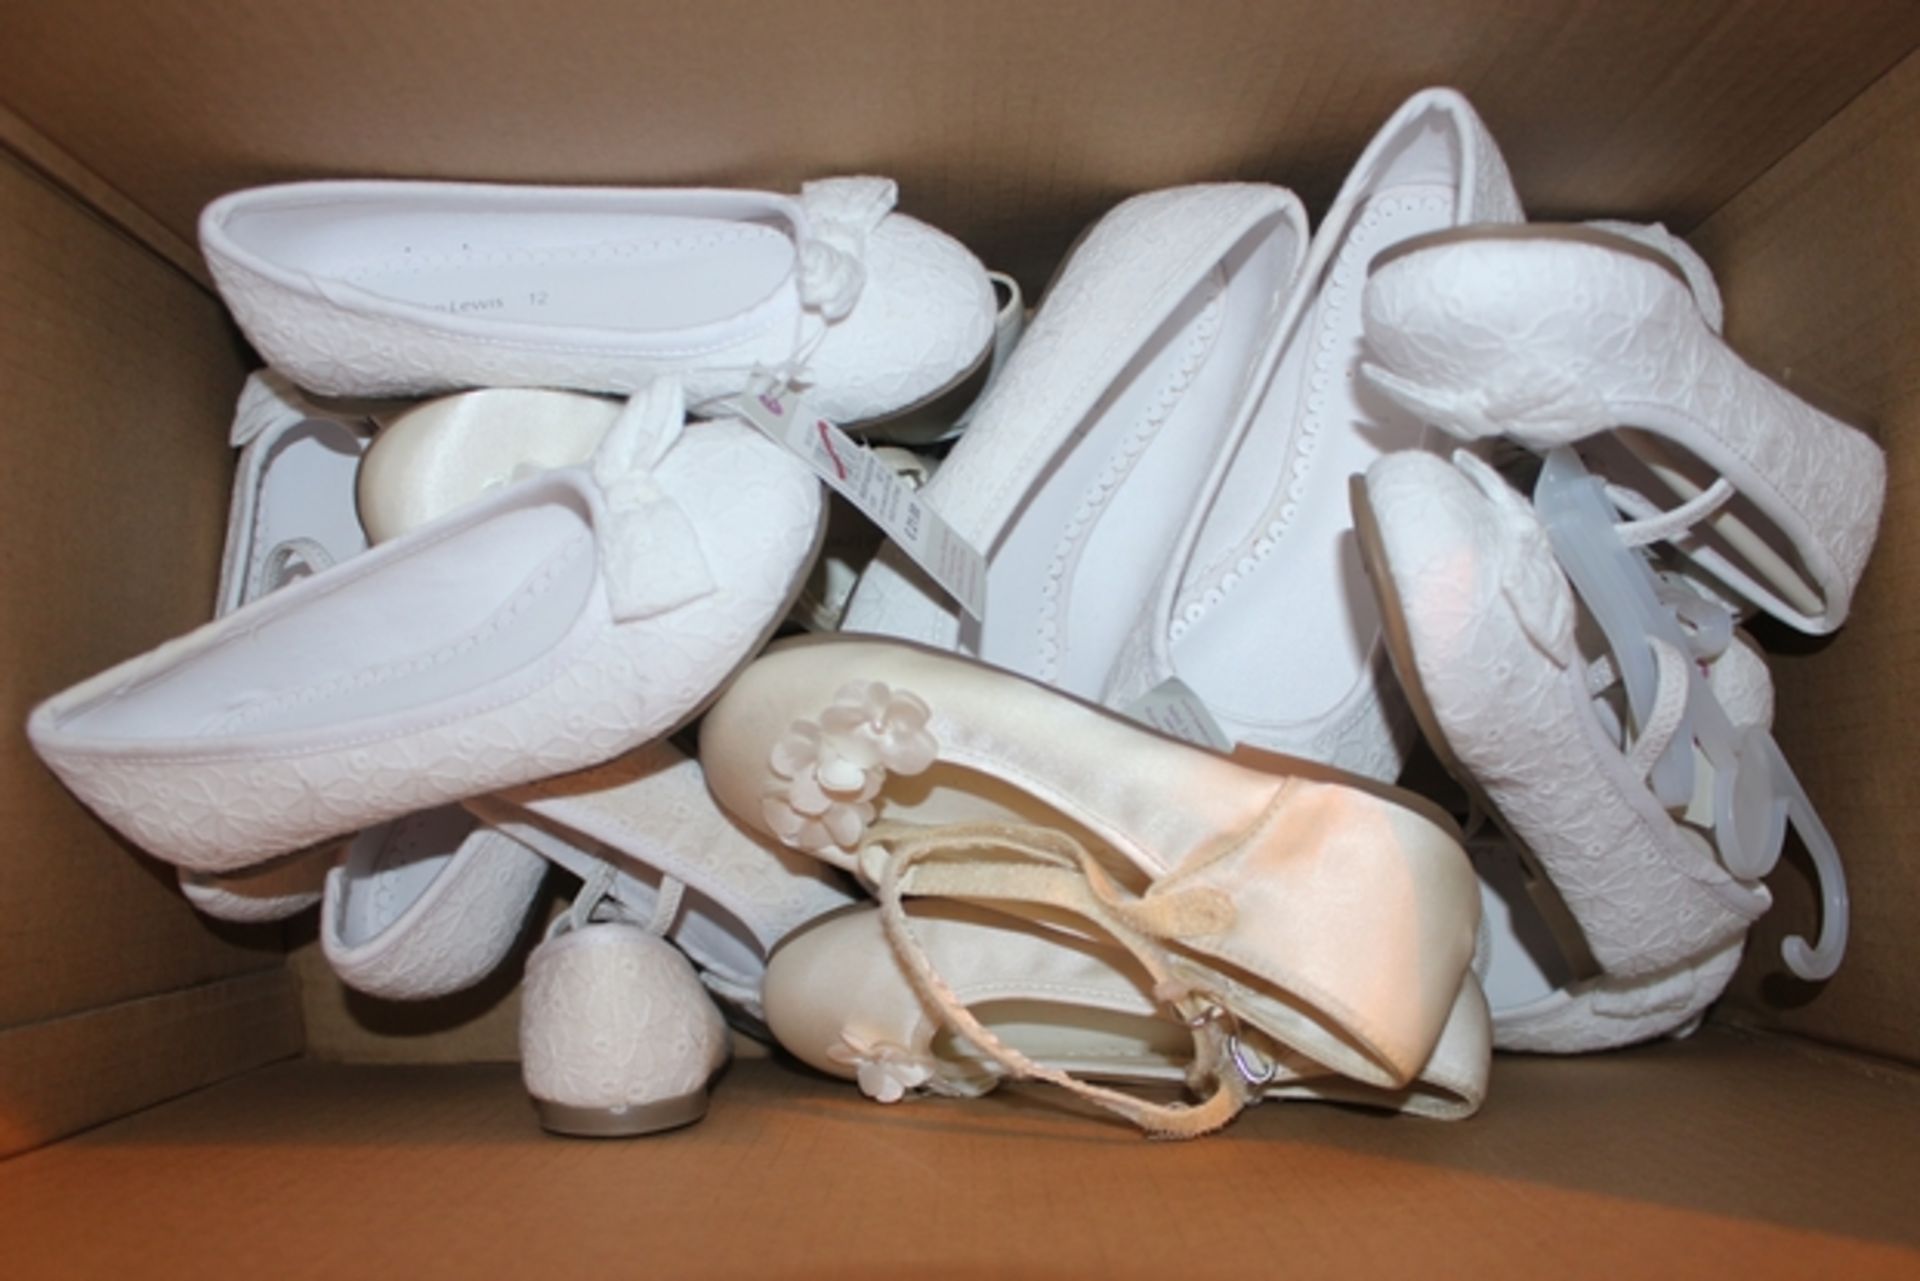 1X LOT TO CONTAIN 14 UNUSED PAIRS OF CHILDREN'S FOOTWEAR COMBINED RRP £280 (DS-TLH-S) (8.101)